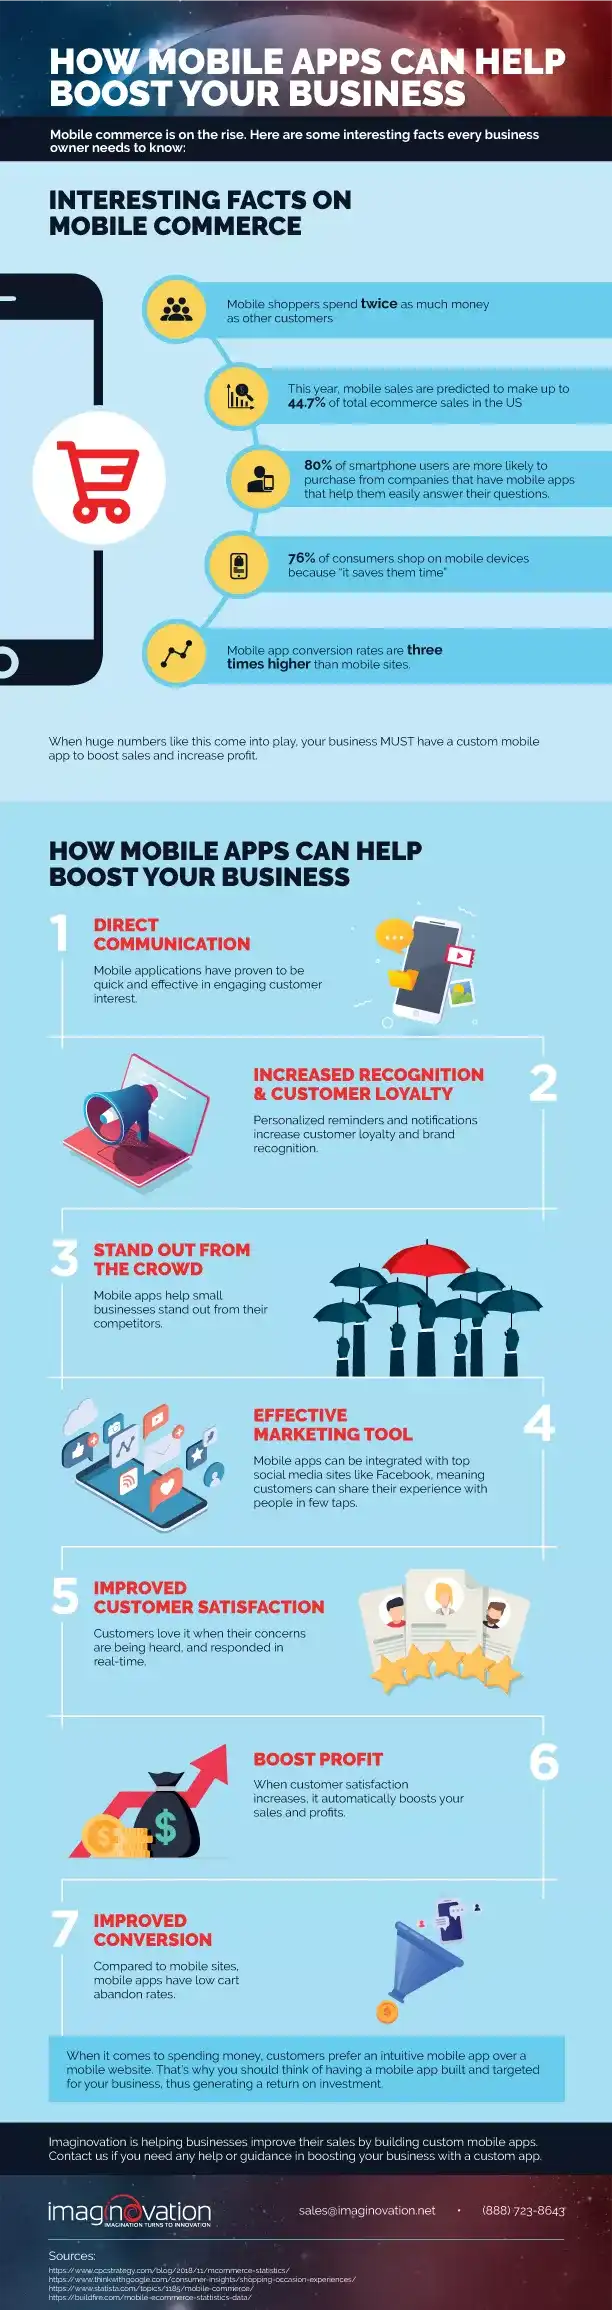 How mobile app benefits your business - Infographic